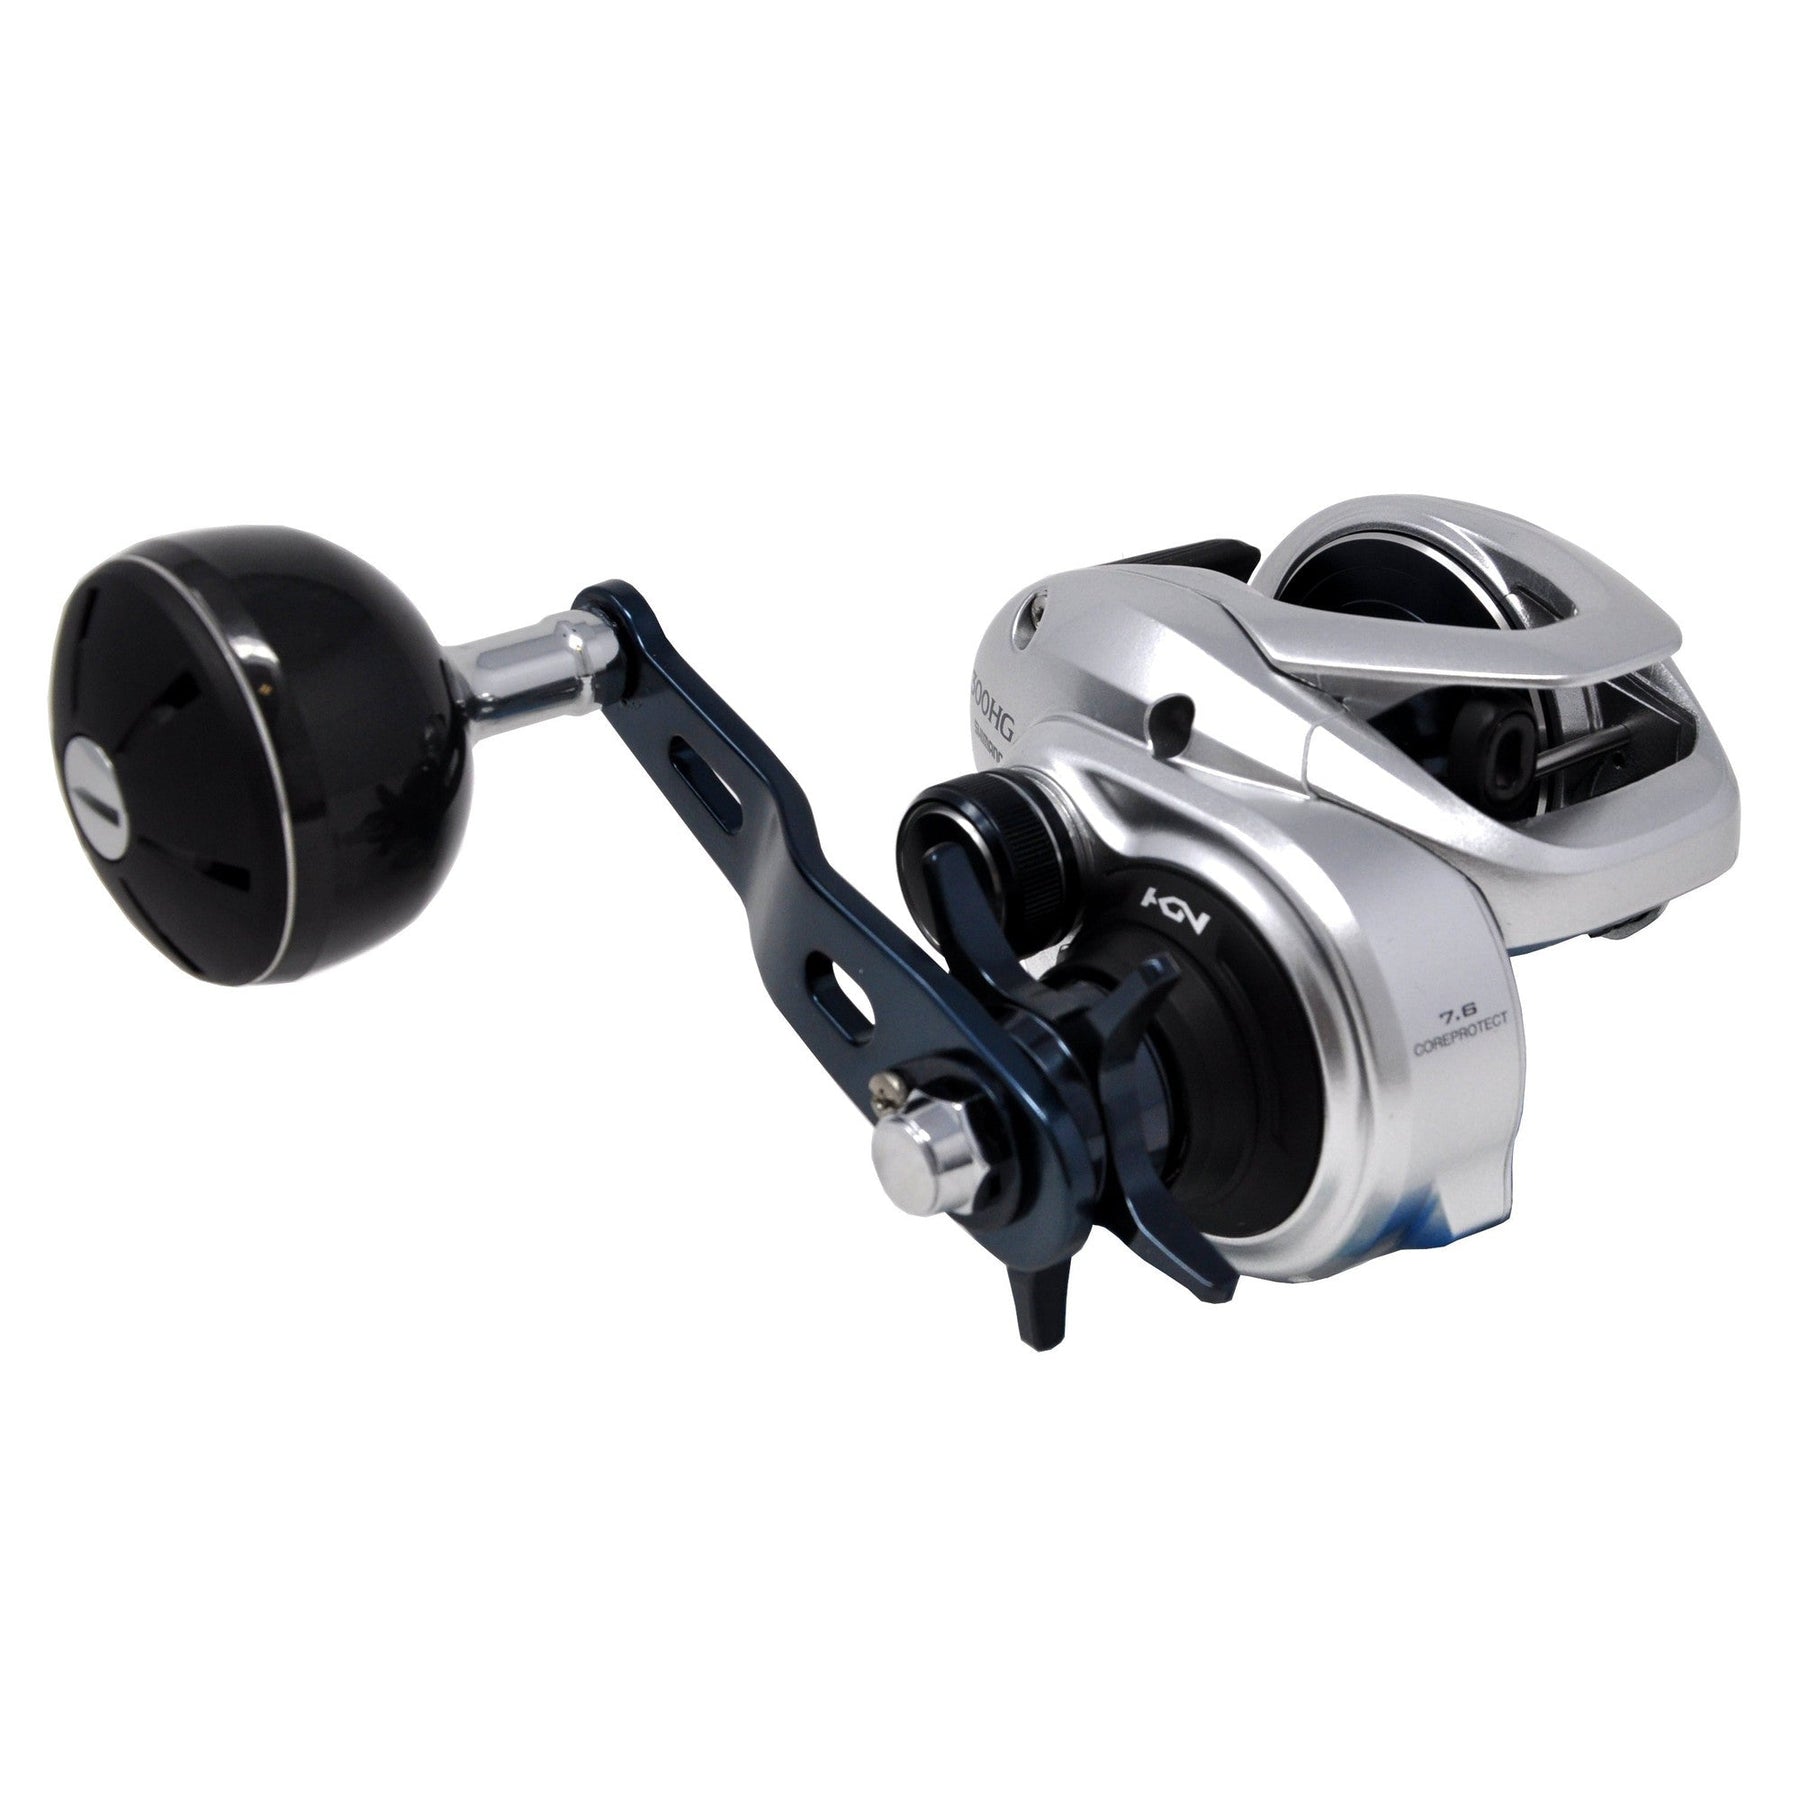 View of Baitcast_Reels Shimano Tranx 300 A Baitcast Reels 7.6:1 Left available at EZOKO Pike and Musky Shop